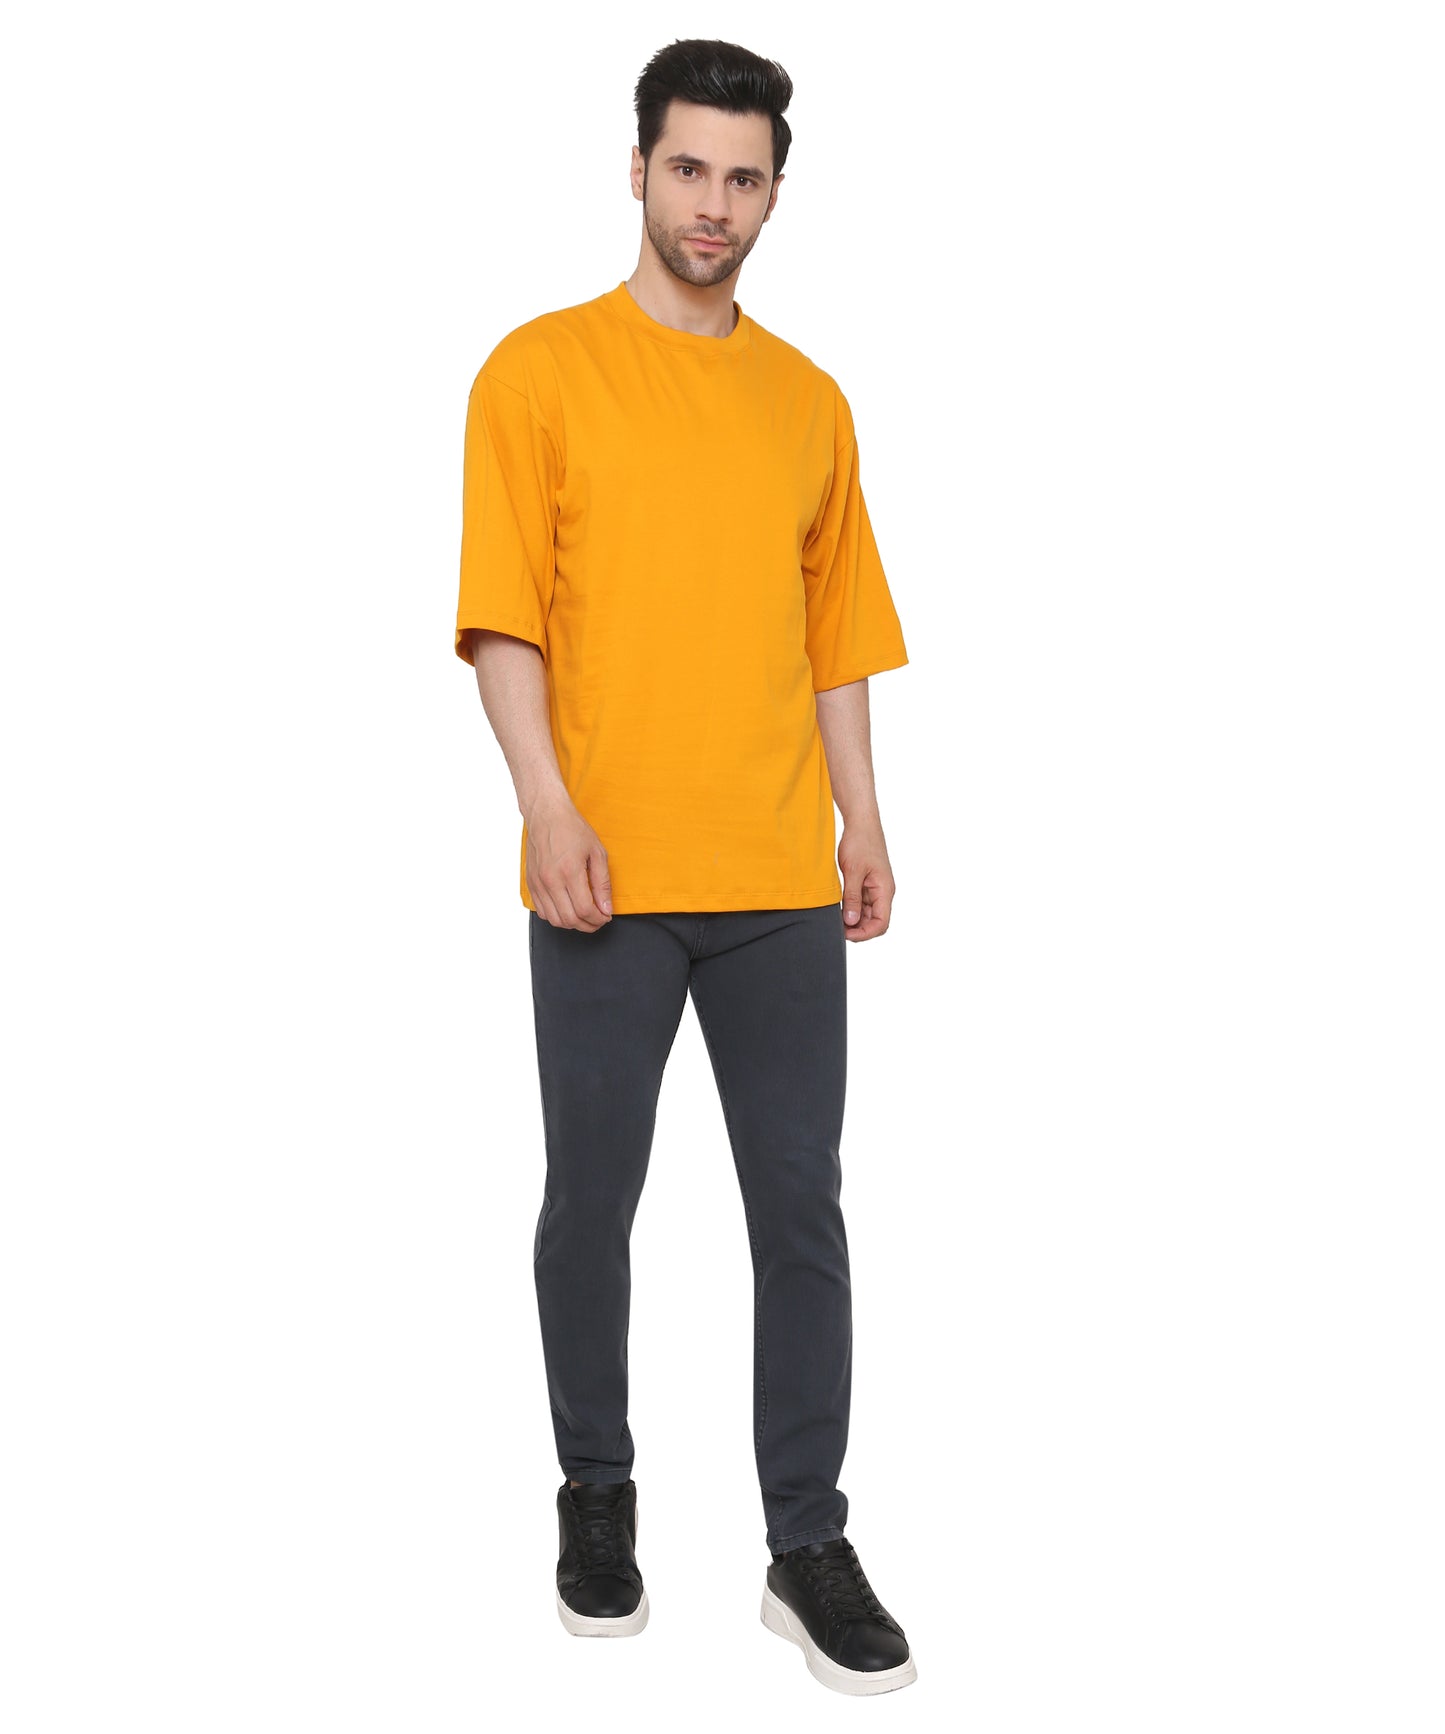 Sunshade Oversized Cotton T-shirts Relaxed Fit Tees for Men